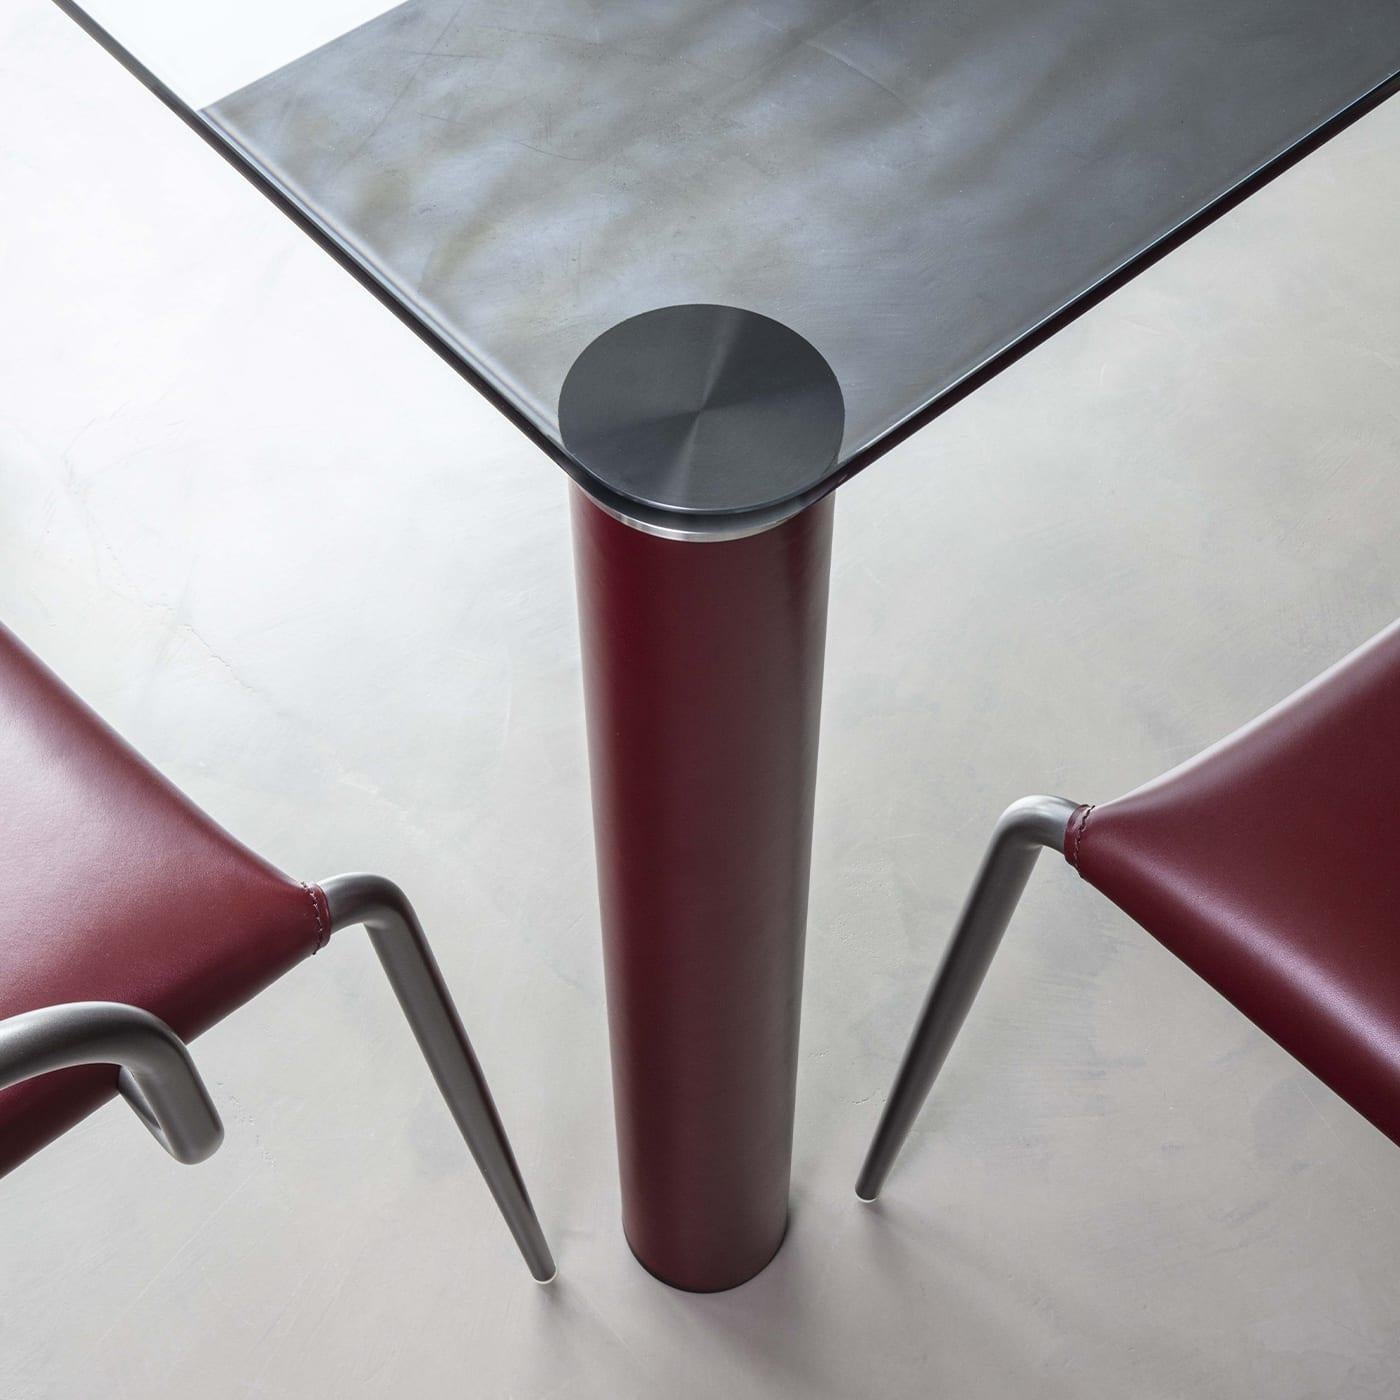 Cylindrical steel legs luxuriously covered in burgundy-hued leather comprise the base of this majestic table, a superb addition to modern dining rooms. A precious tabletop in smoked crystal with rounded corners and delrin feet completes the design.